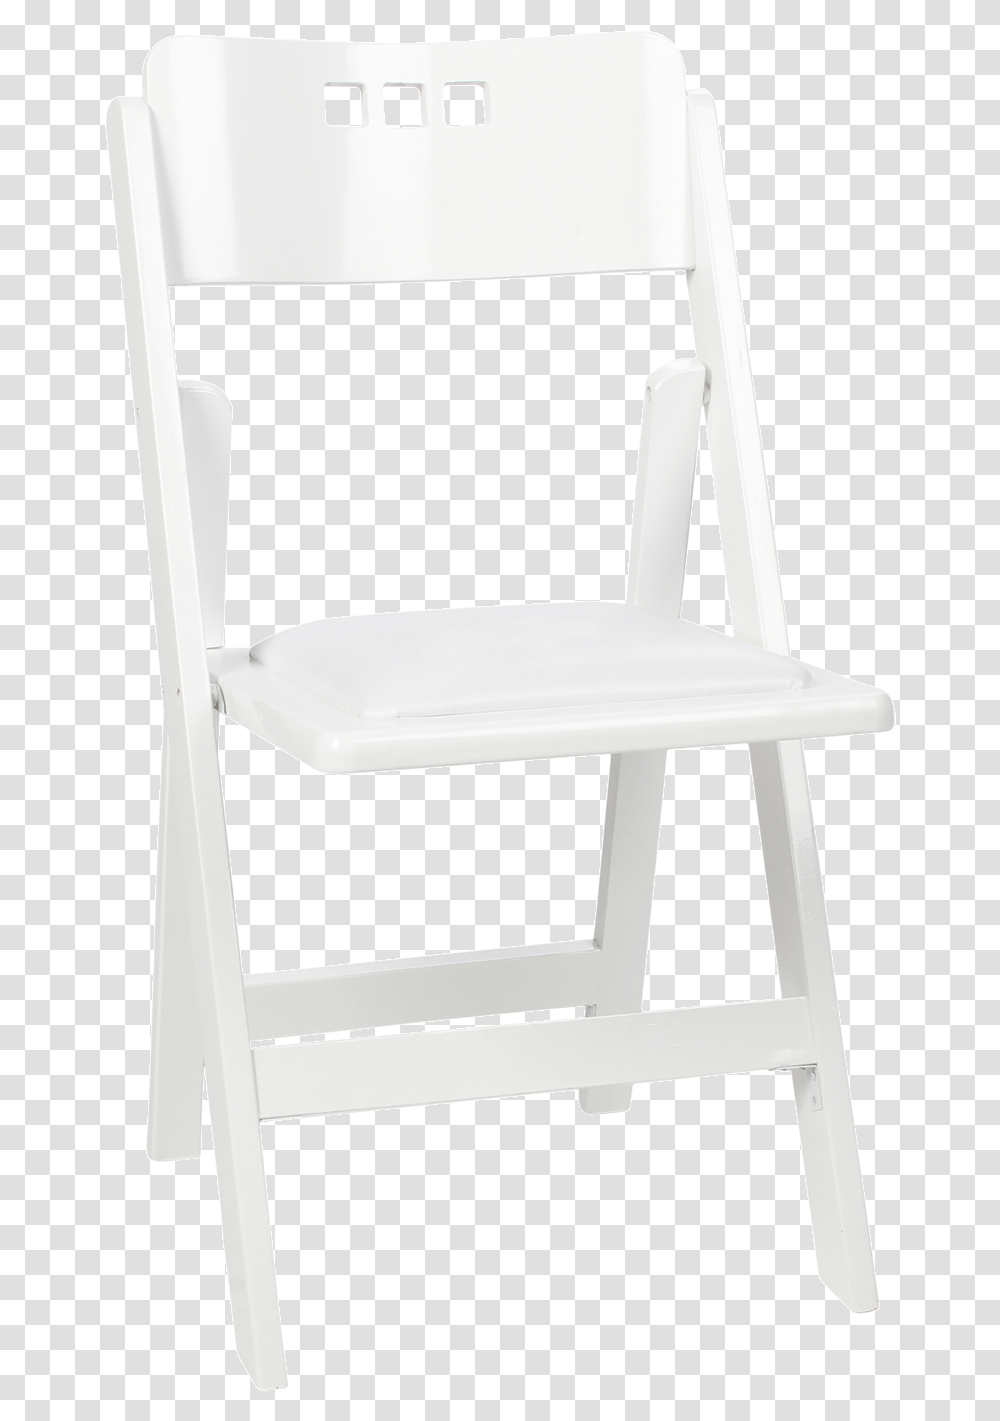 White Chair For Party, Furniture, Stand, Shop, Rocking Chair Transparent Png